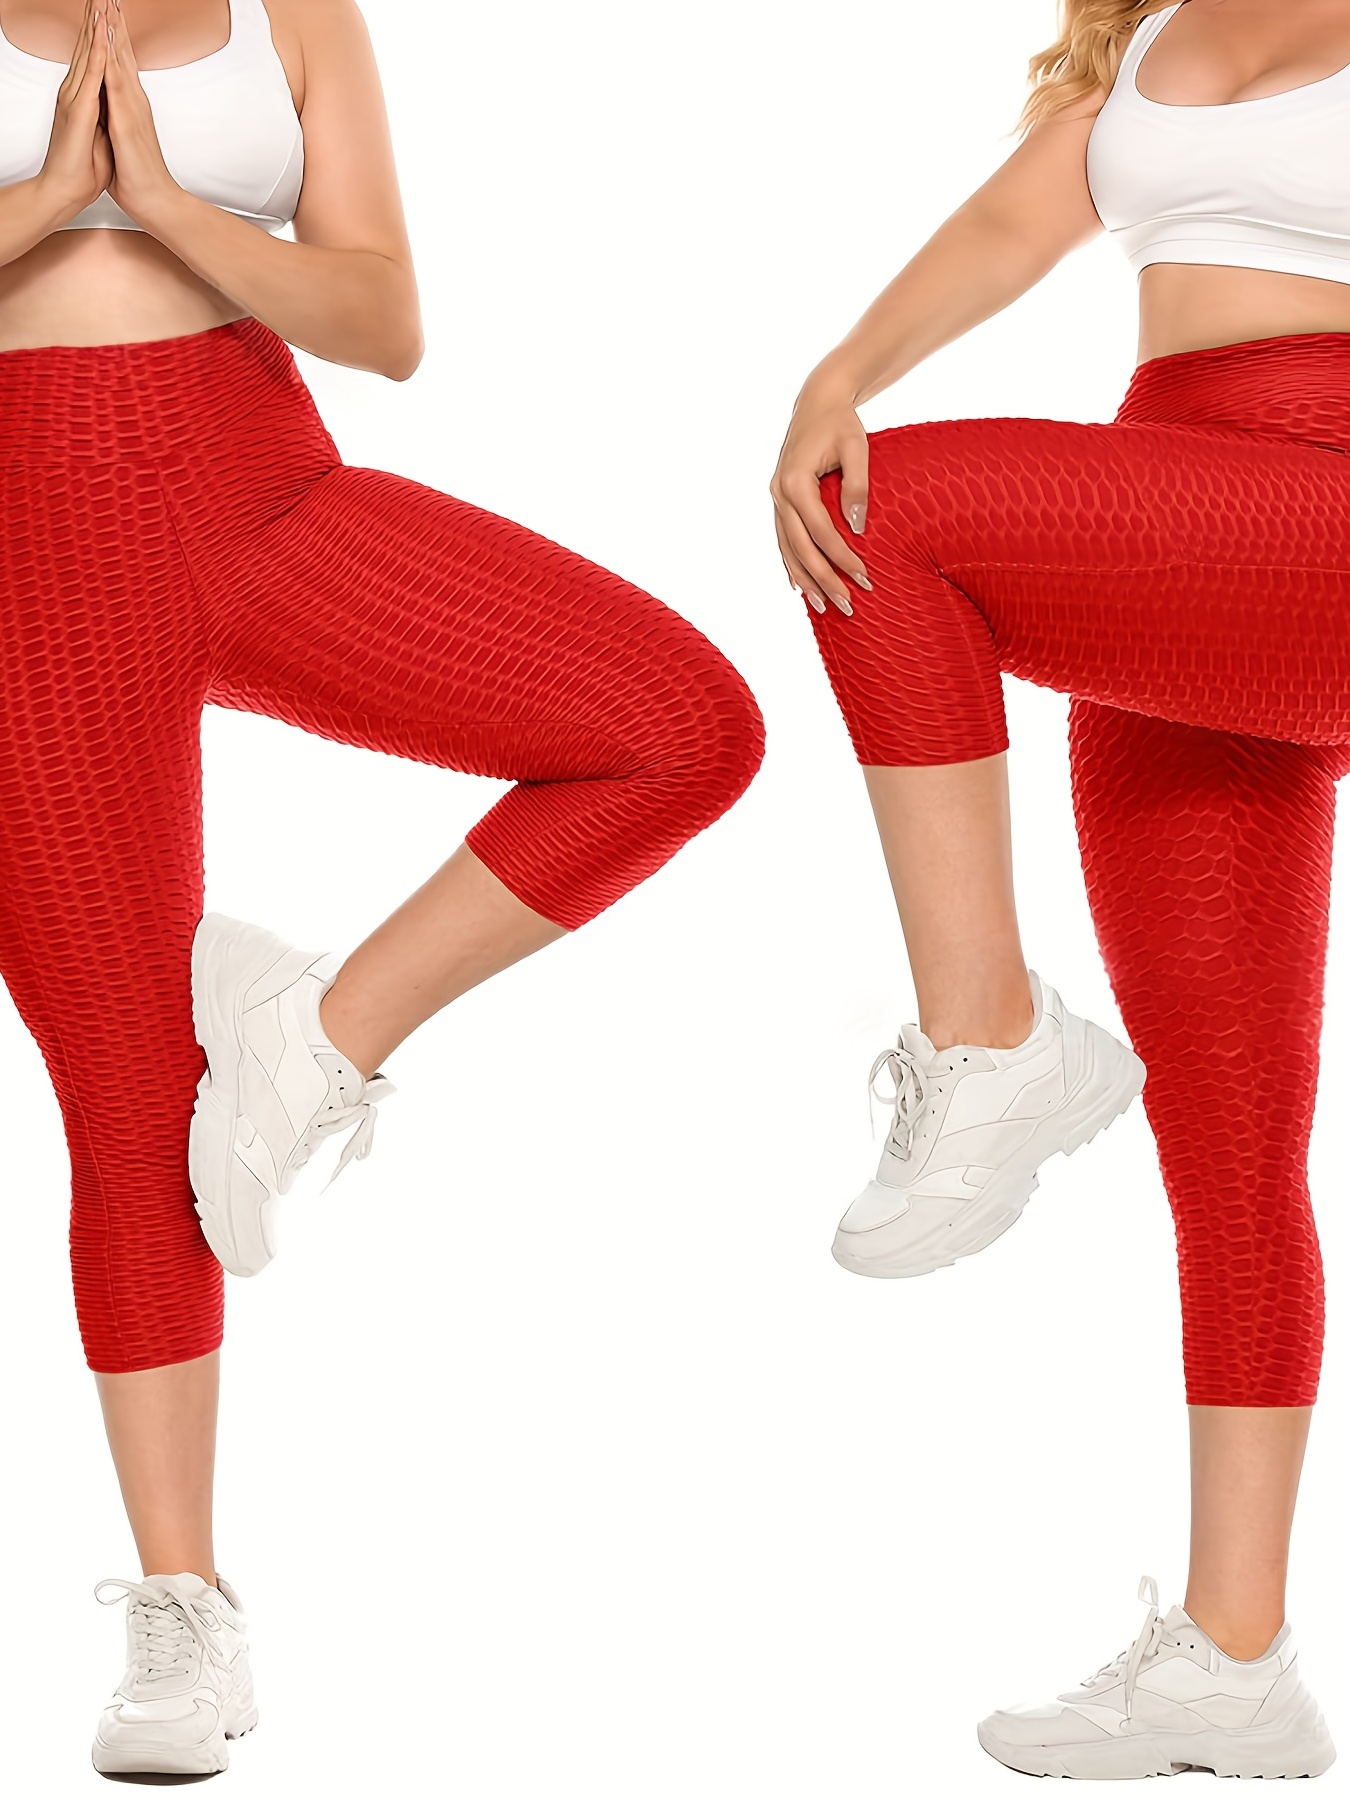 Yoga Pants for Women High Waisted Anti Cellulite Leggings Textured Scrunch  Ruched Booty Lift Leggings Fitness Running Tights Plus Size Leggings